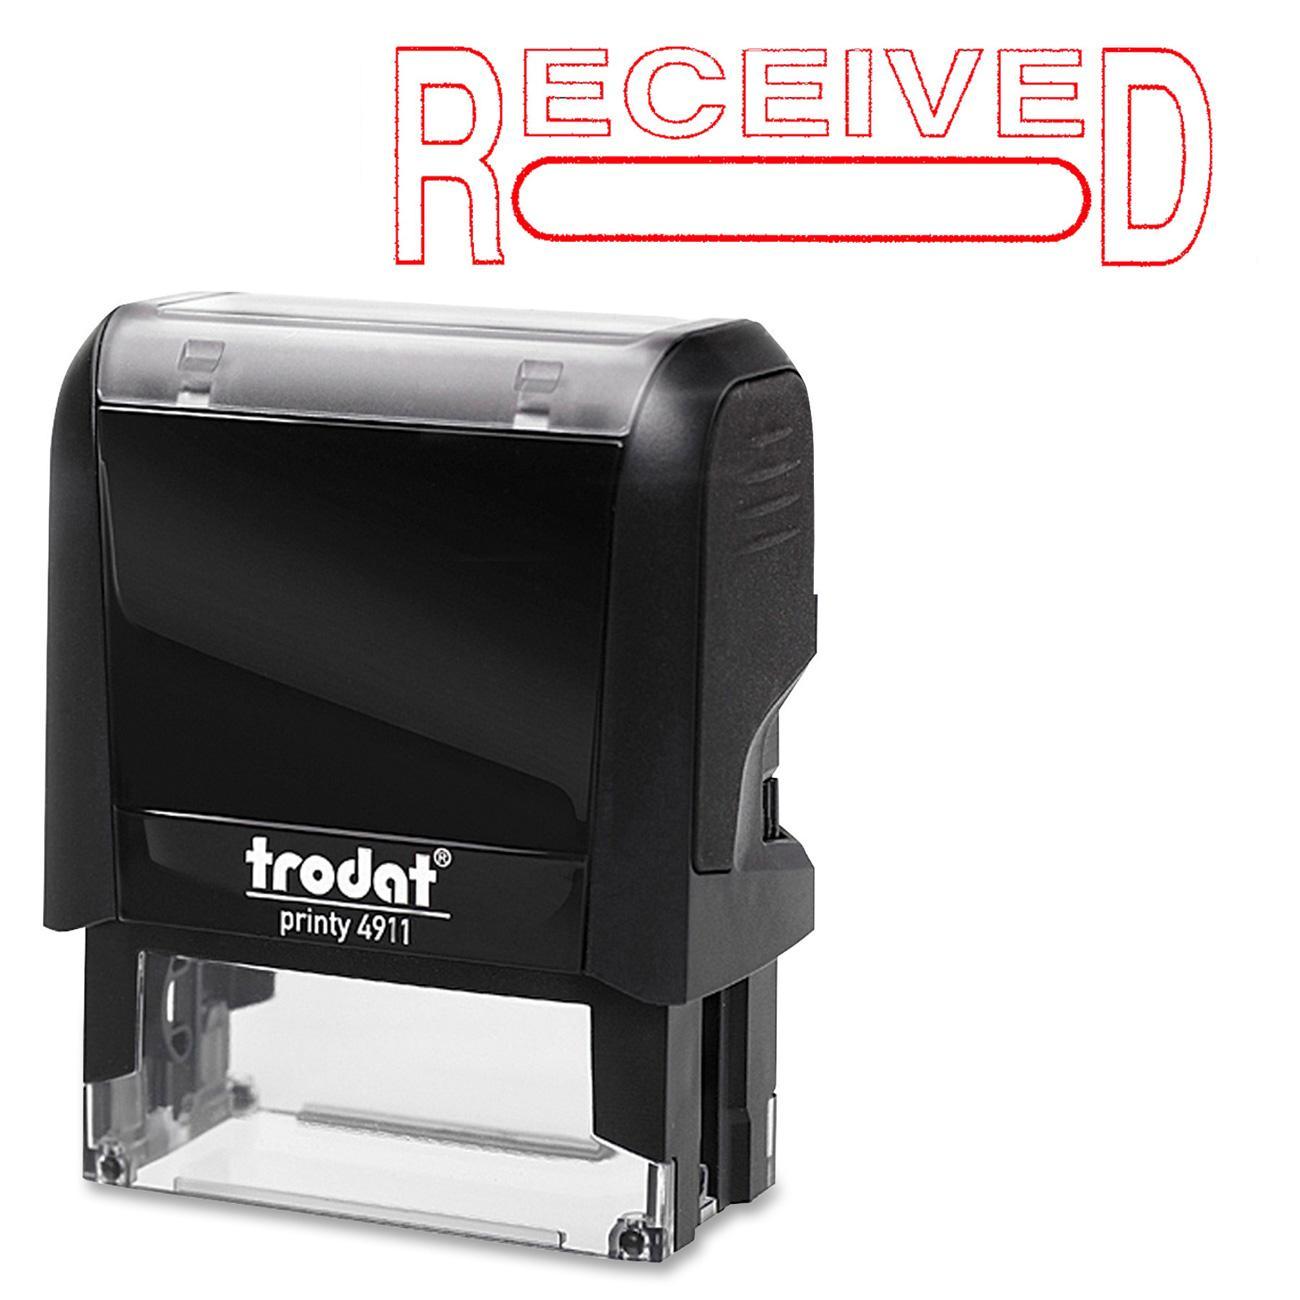 Trodat Self Inking ''RECEIVED'' Stamp with text option - Each